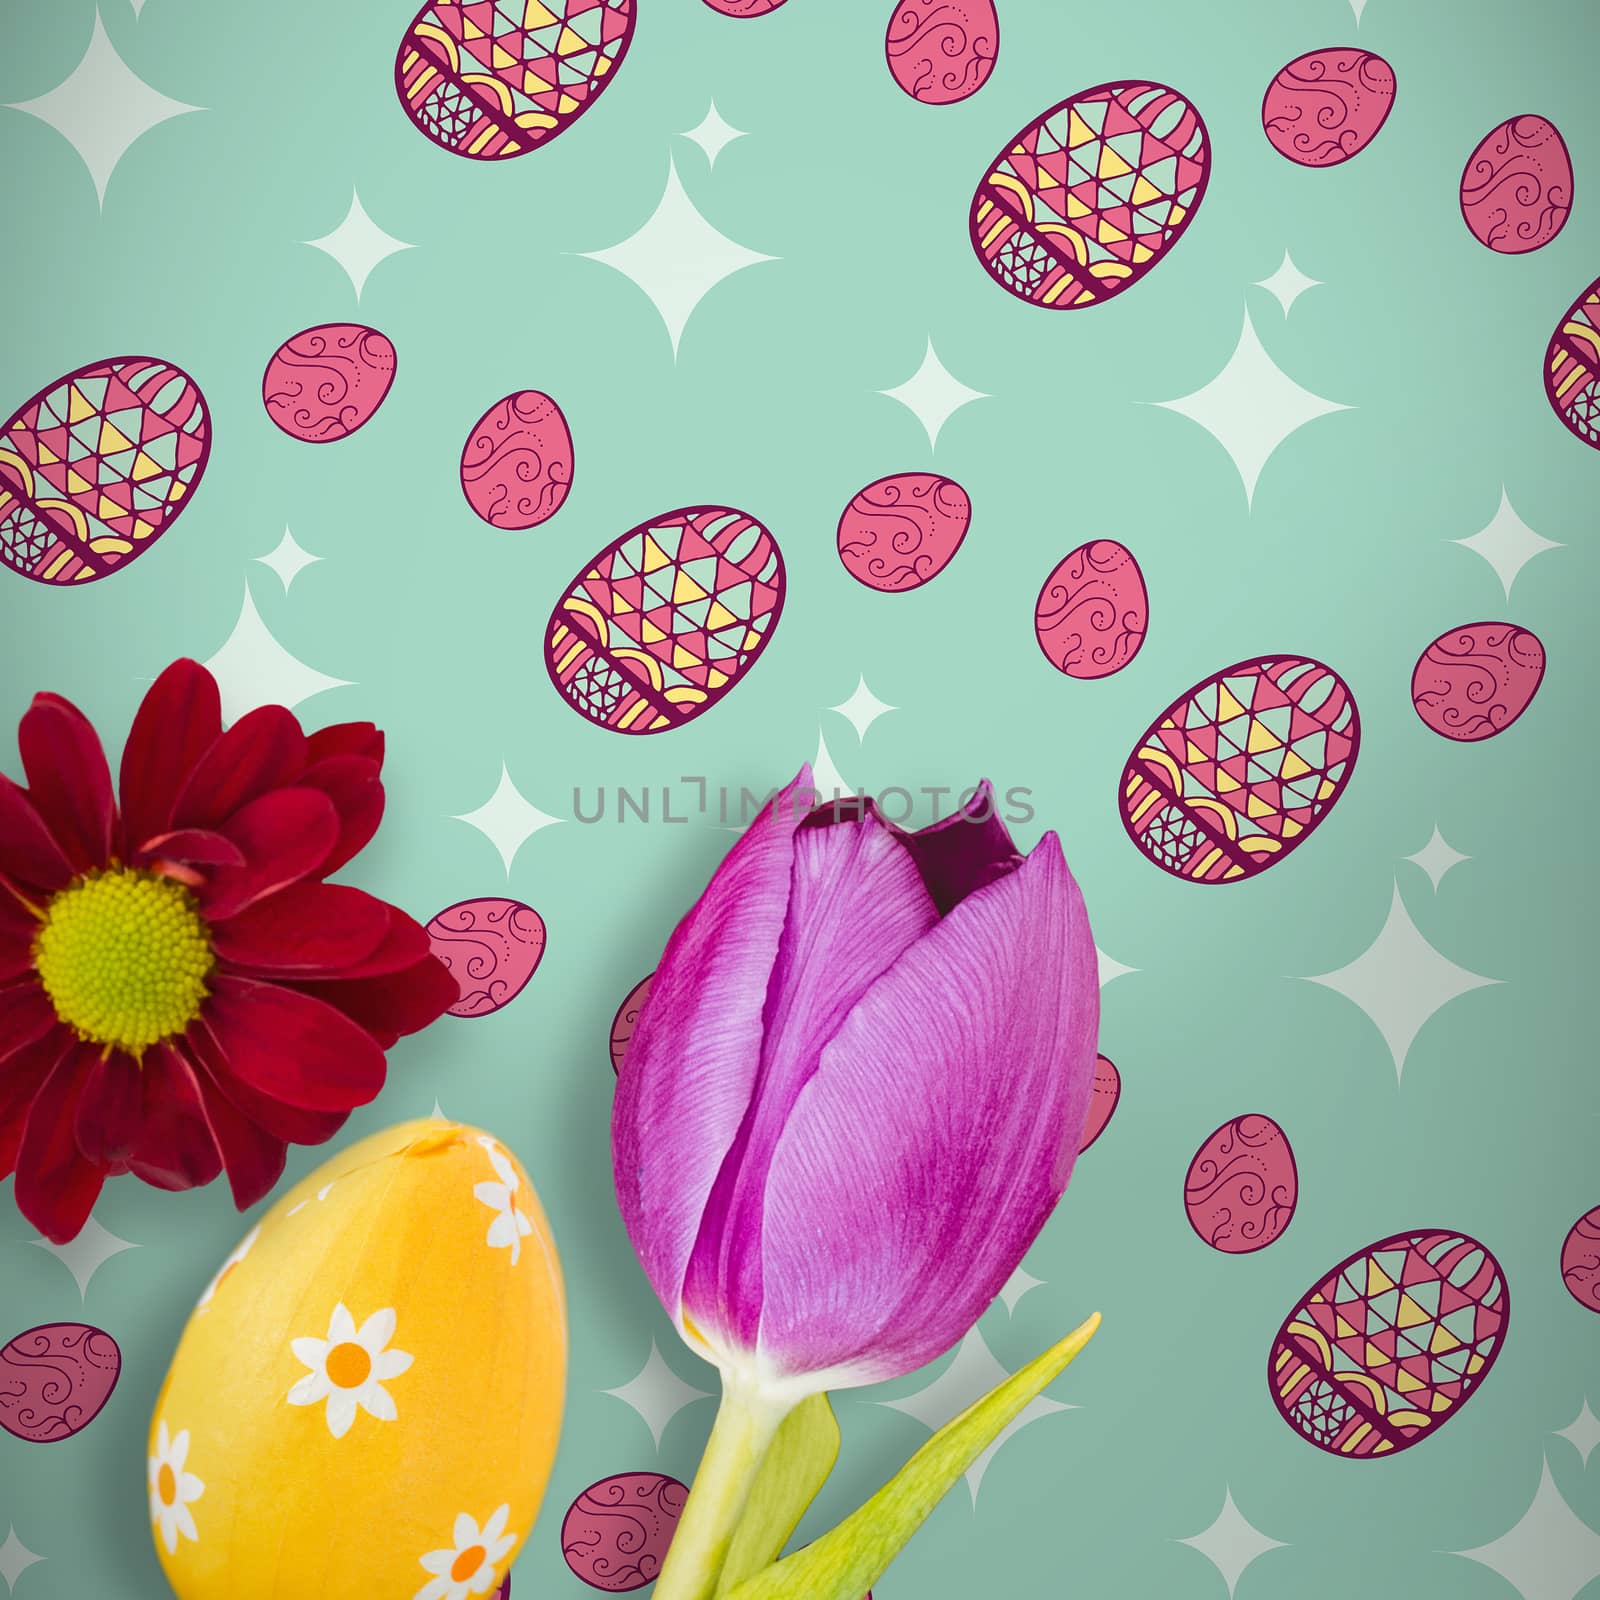 Picture of a flower against easter egg